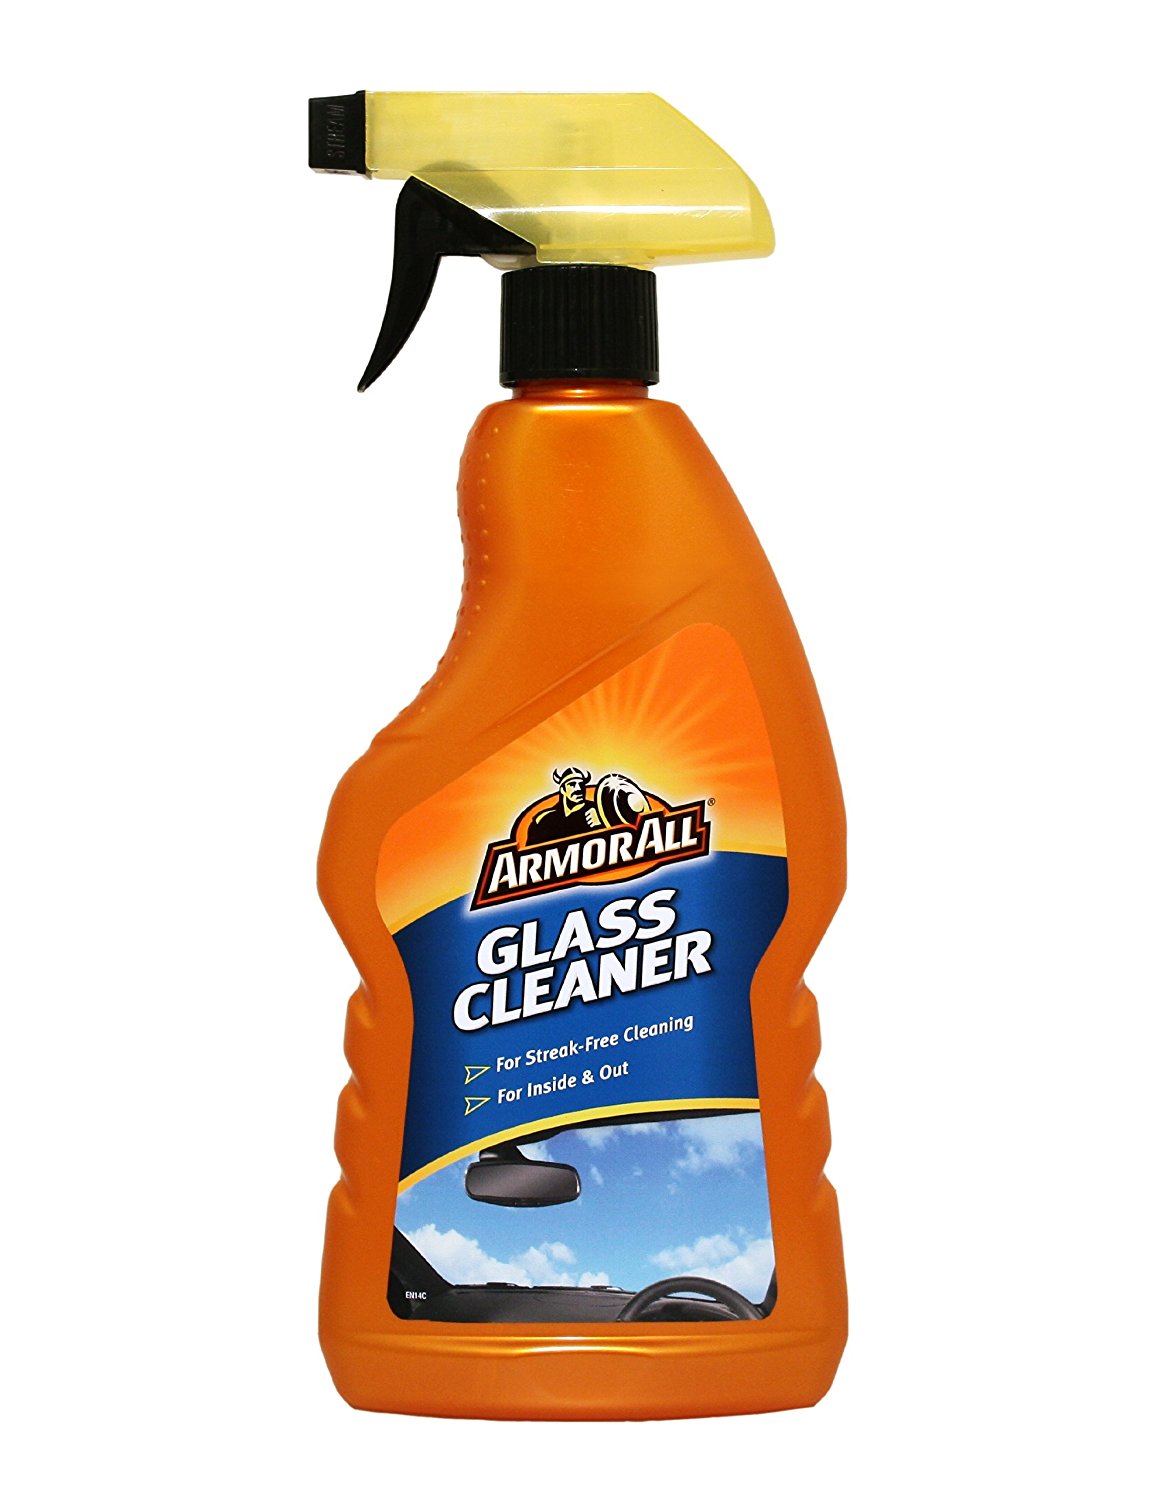 Review of Armor All Glass Cleaner